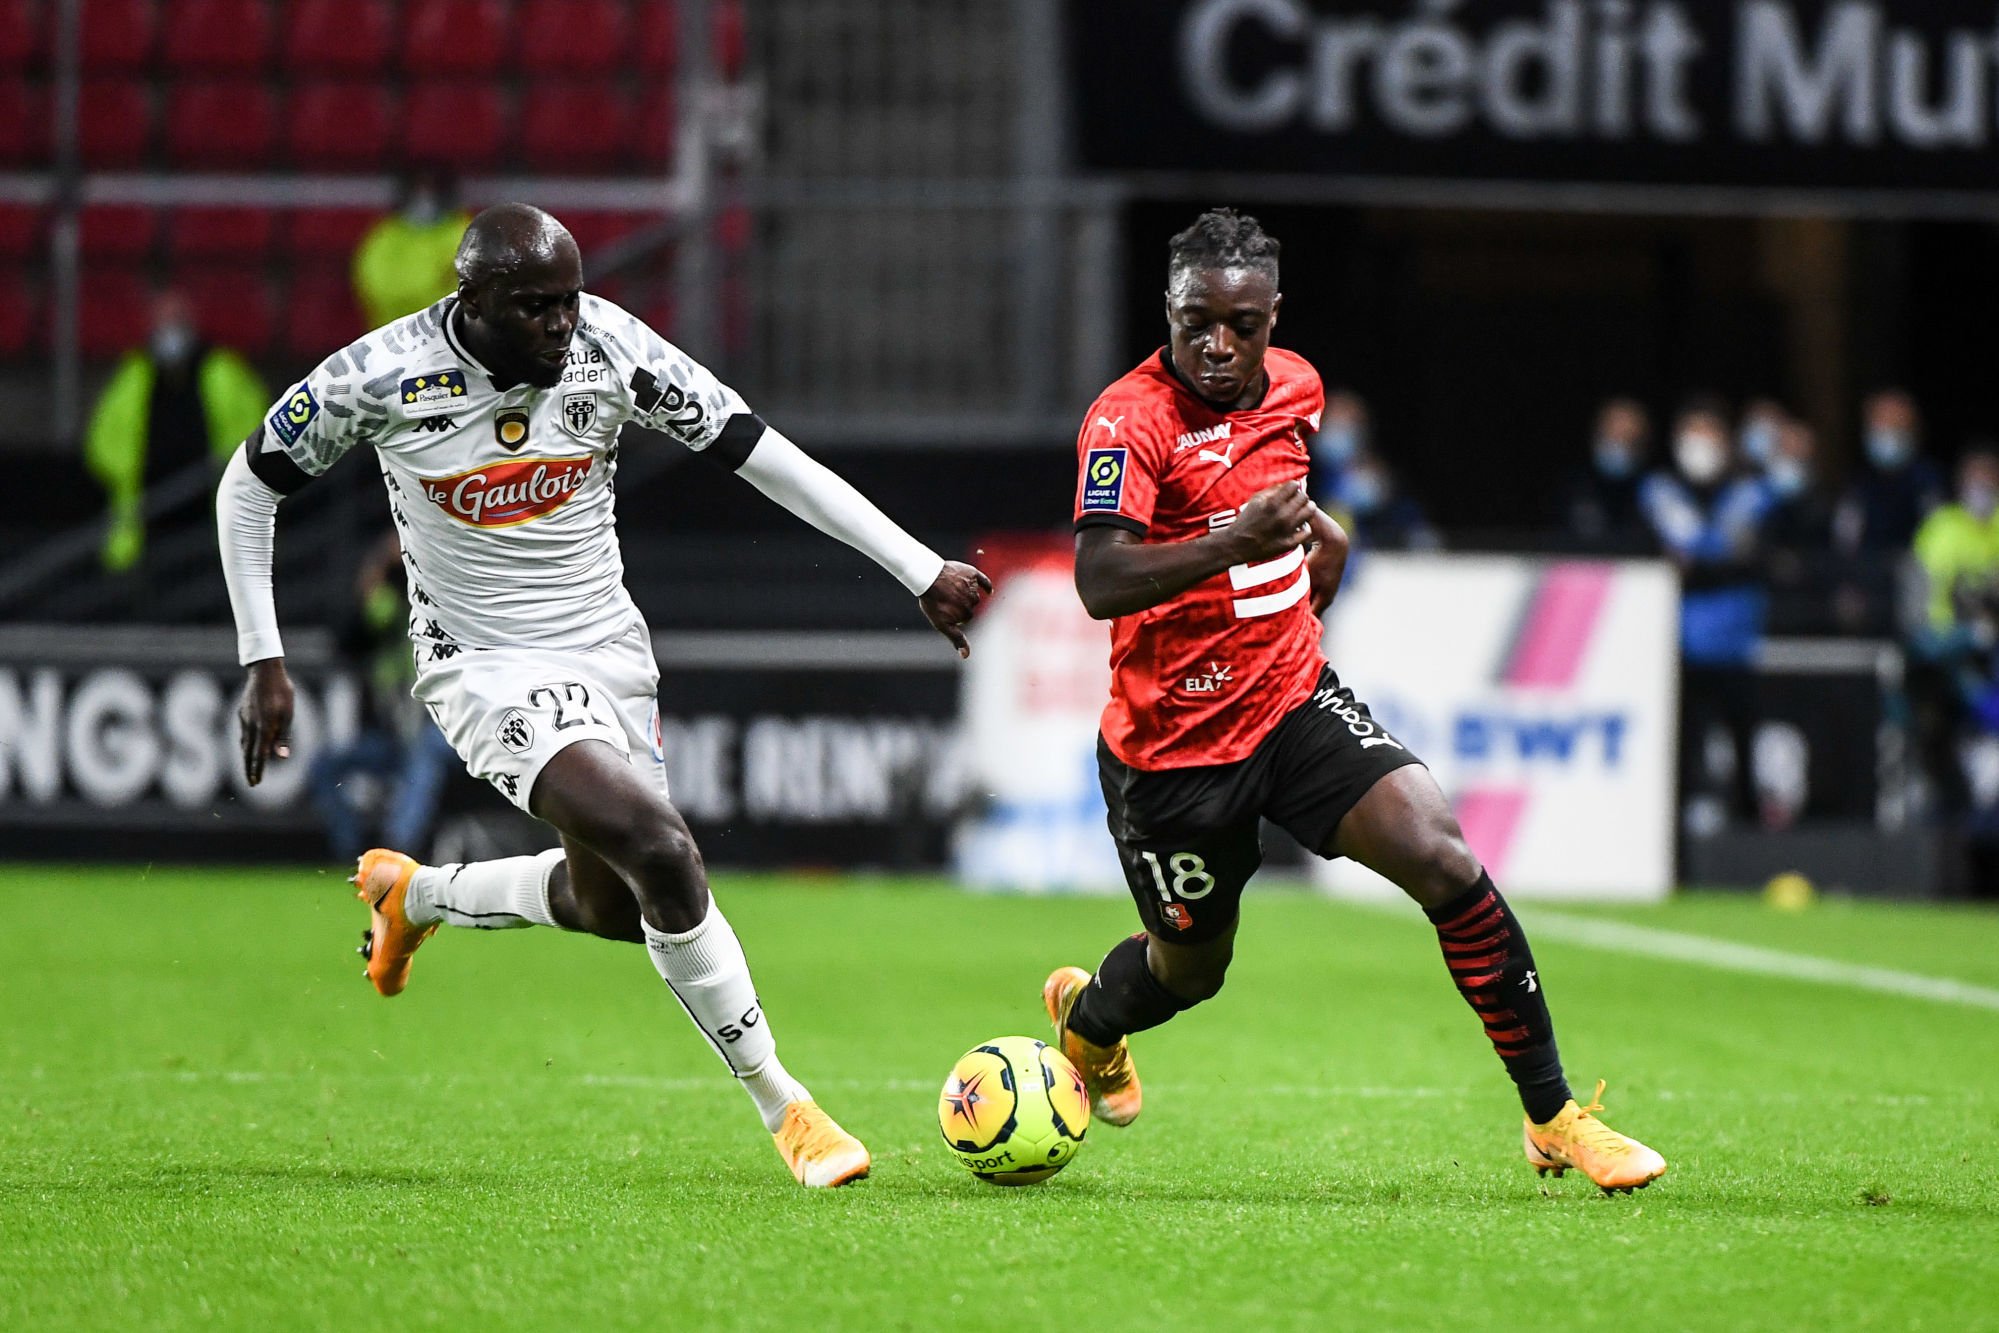 Sada THIOUB of Angers and Jeremy DOKU of Rennes during the Ligue 1 match between Stade Rennes and Angers SCO at Roazhon Park on October 23, 2020 in Rennes, France. (Photo by Anthony Dibon/Icon Sport) - Sada THIOUB - Jeremy DOKU - Roazhon Park - Rennes (France)